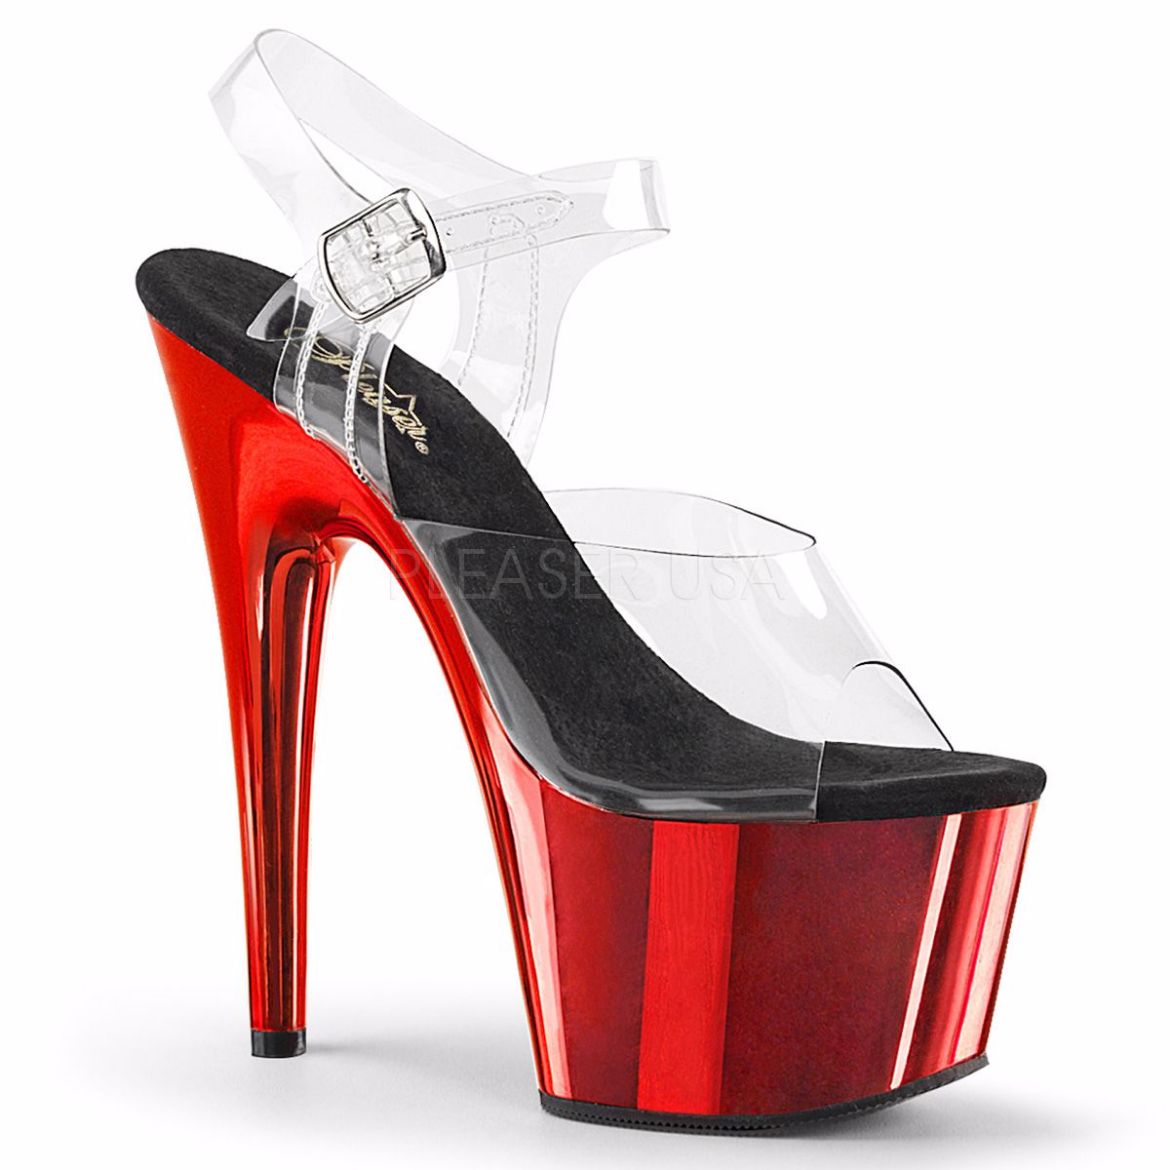 Product image of Pleaser Adore-708 Clear/Red Chrome, 7 inch (17.8 cm) Heel, 2 3/4 inch (7 cm) Platform Sandal Shoes